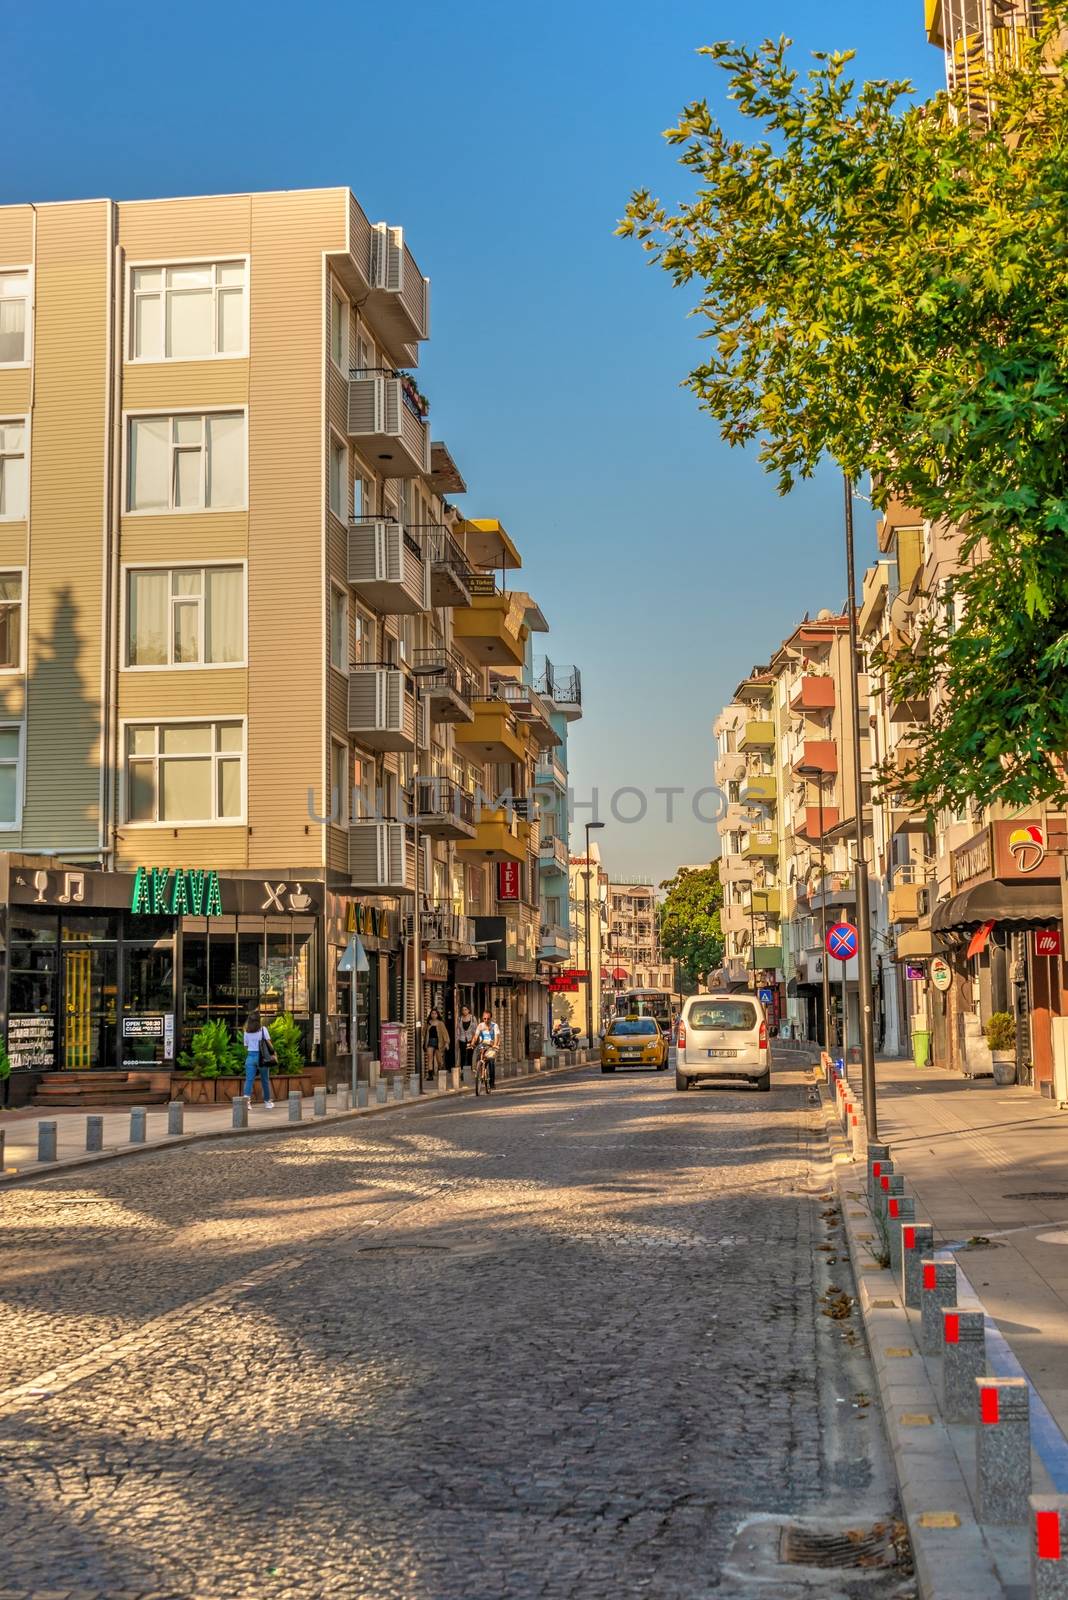 Streets of the Canakkale in Turkey by Multipedia